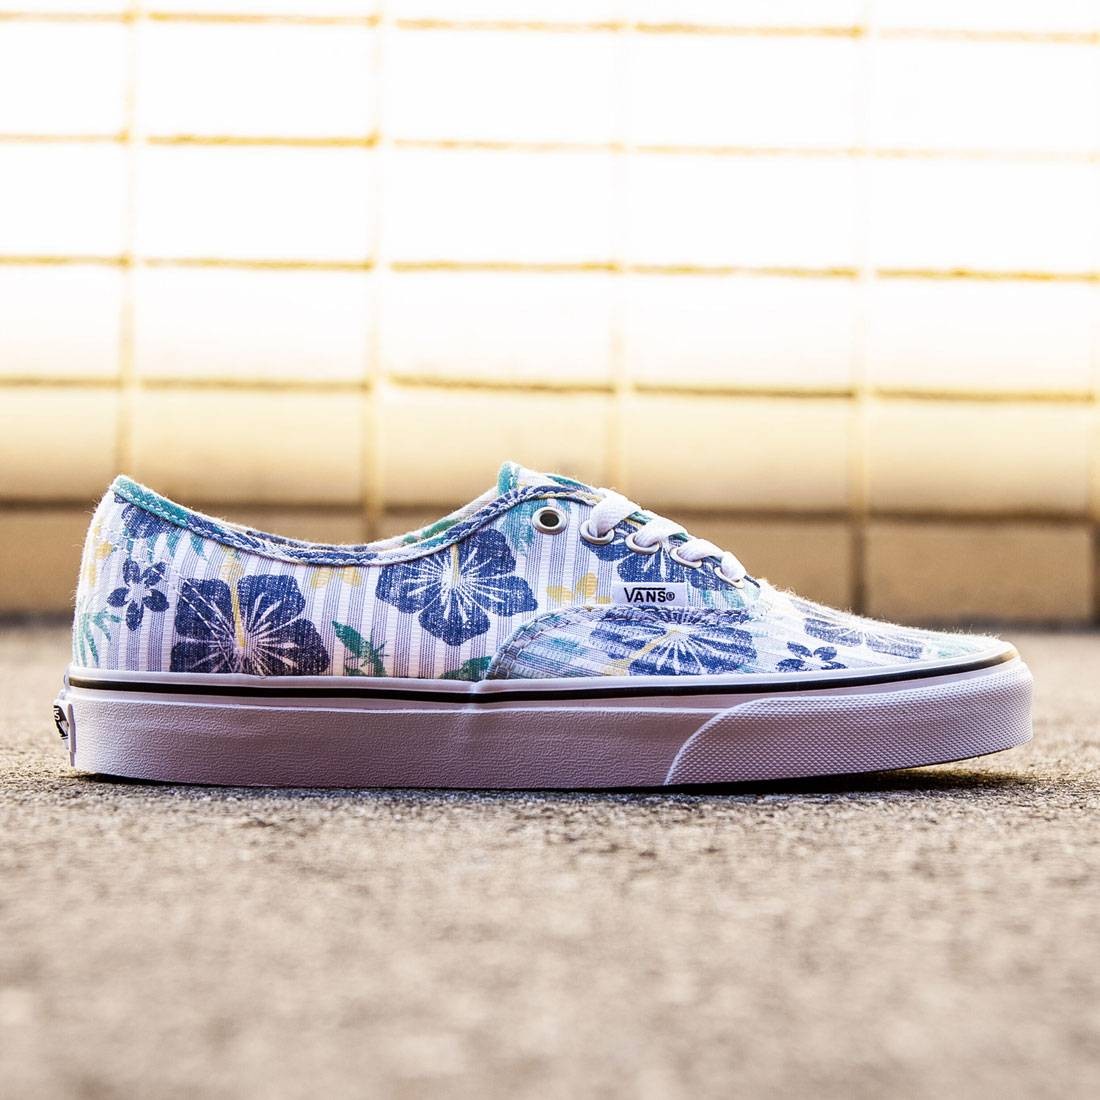 blue and white striped vans